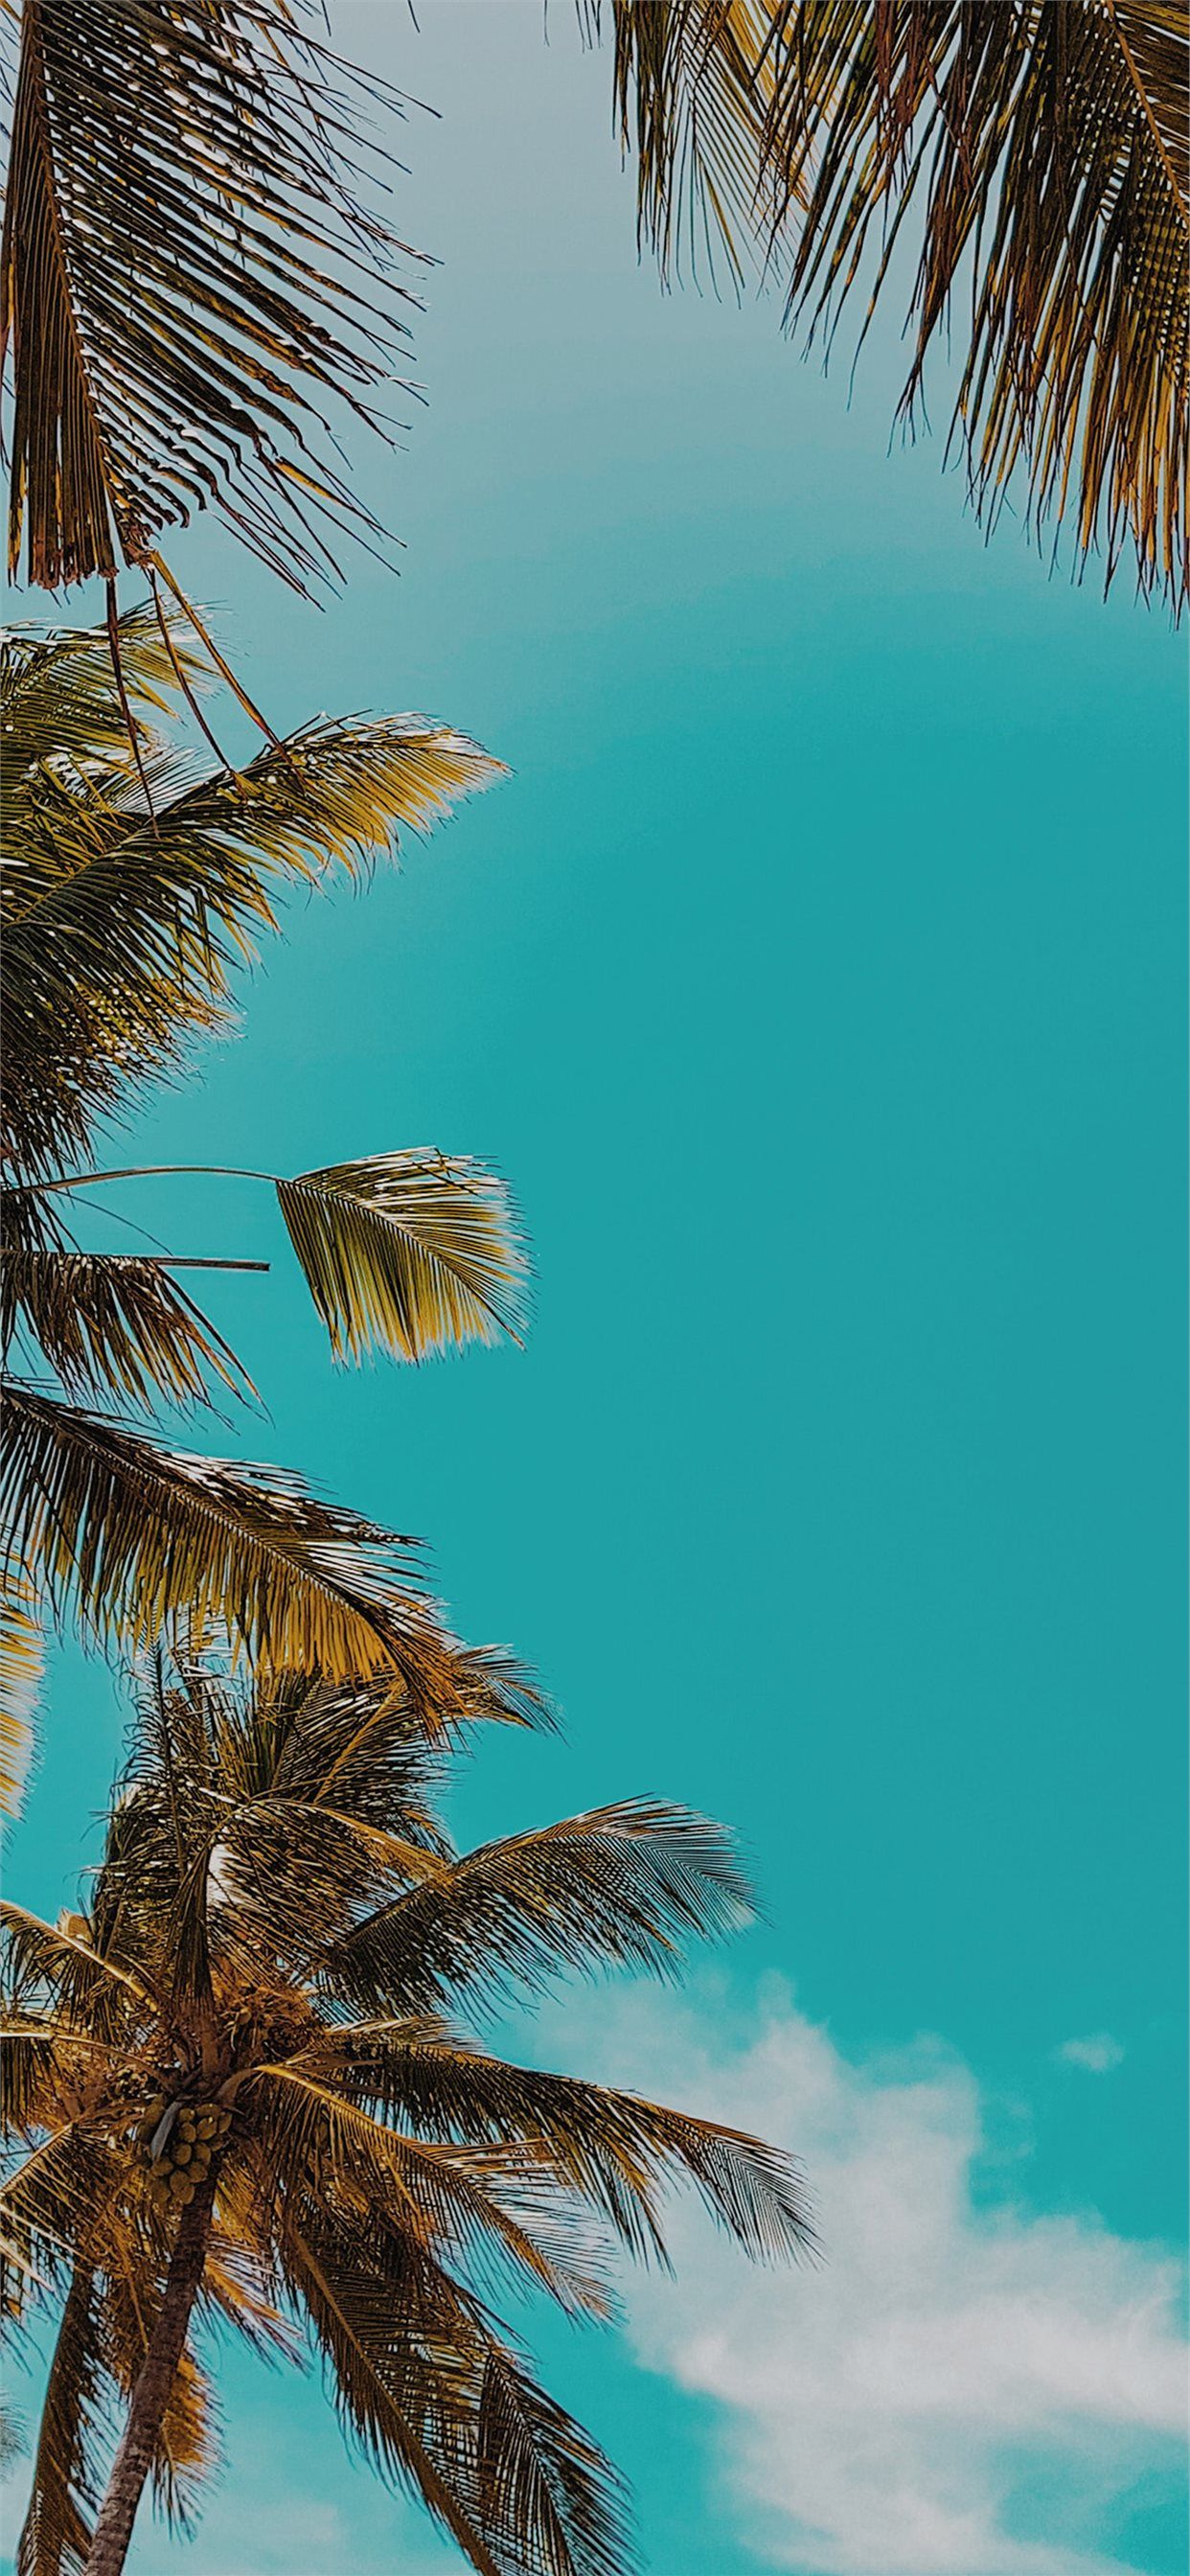 Apple ob59 summer tree palm nature iPhone X Wallpaper Free Download